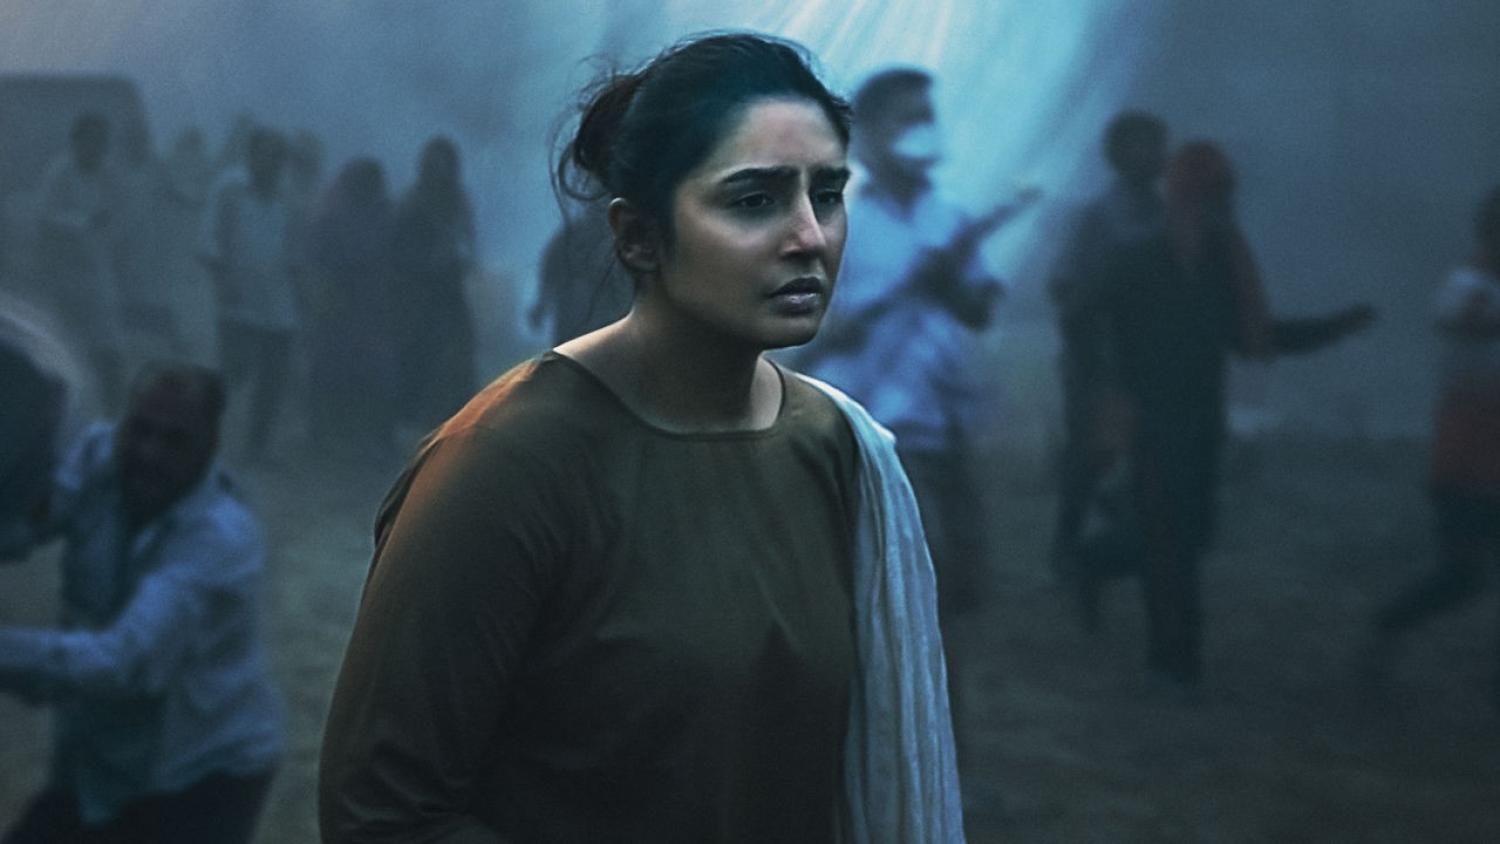 The bleak future in India depicted in a scene from Netflix series ”Leila” (Photo: Netflix)